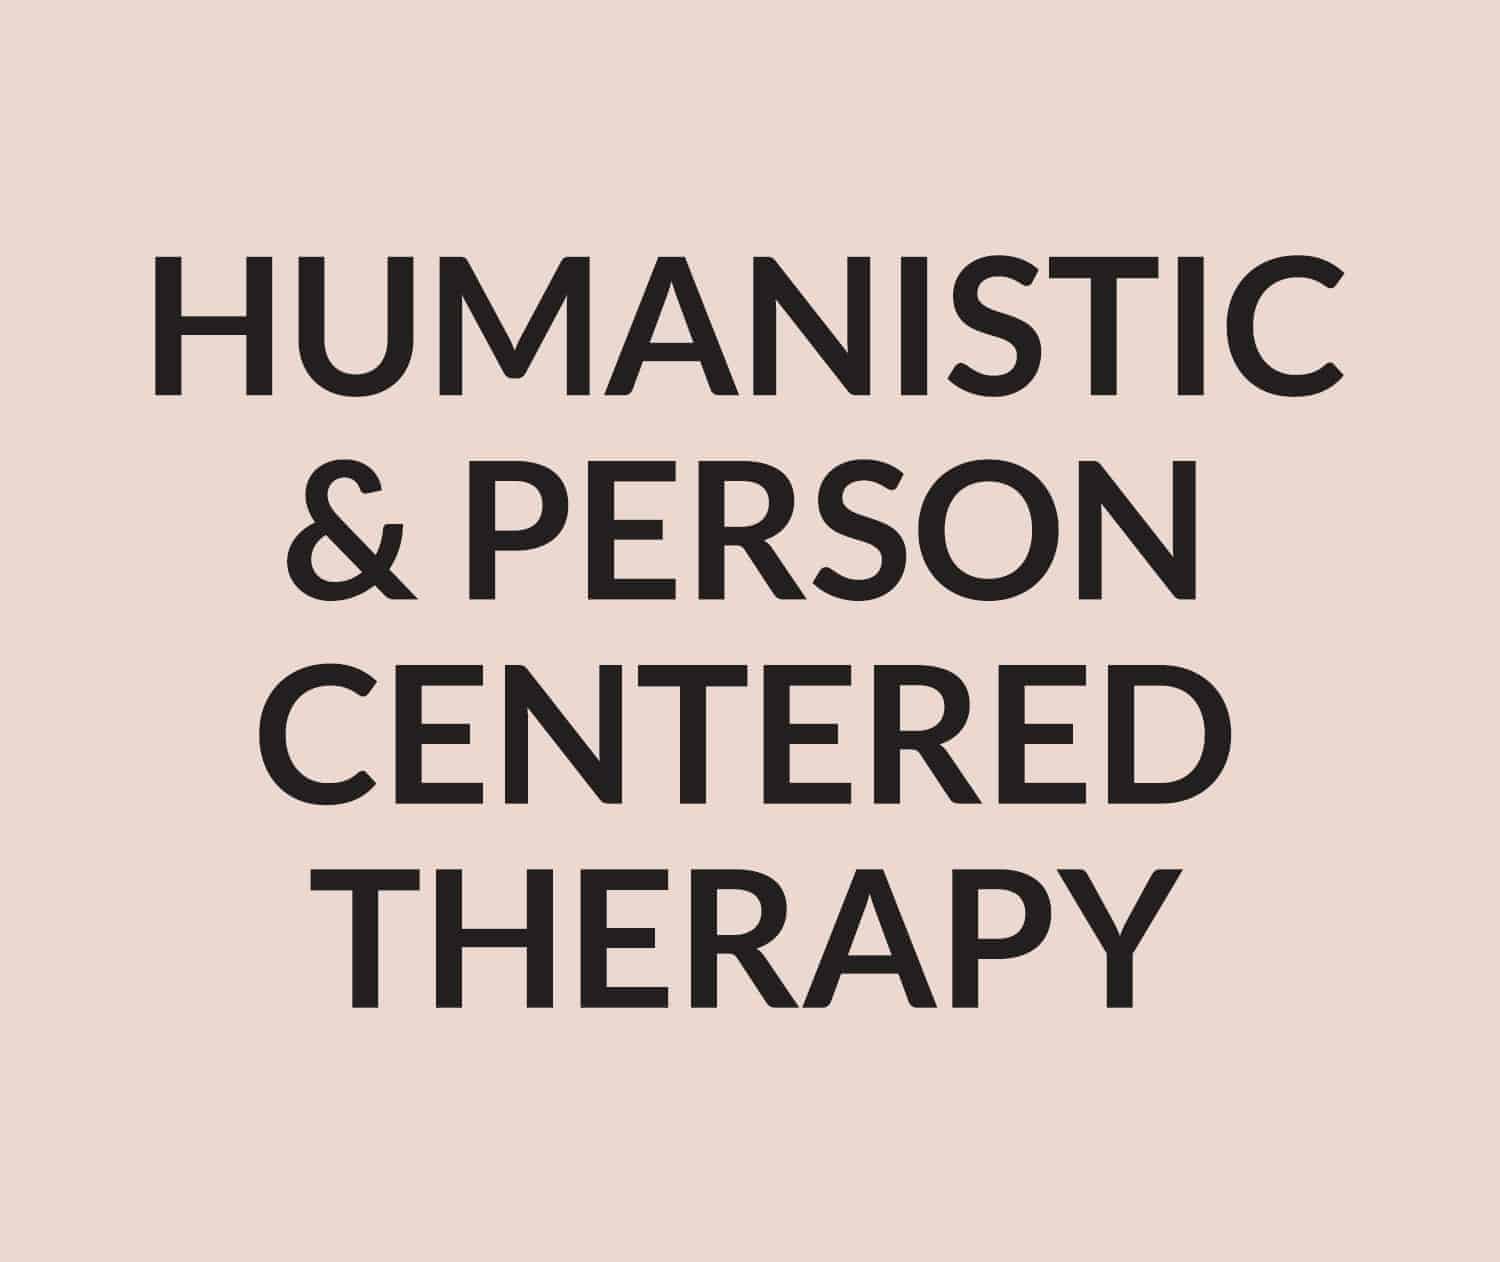 Humanistic & Person Centered Therapy